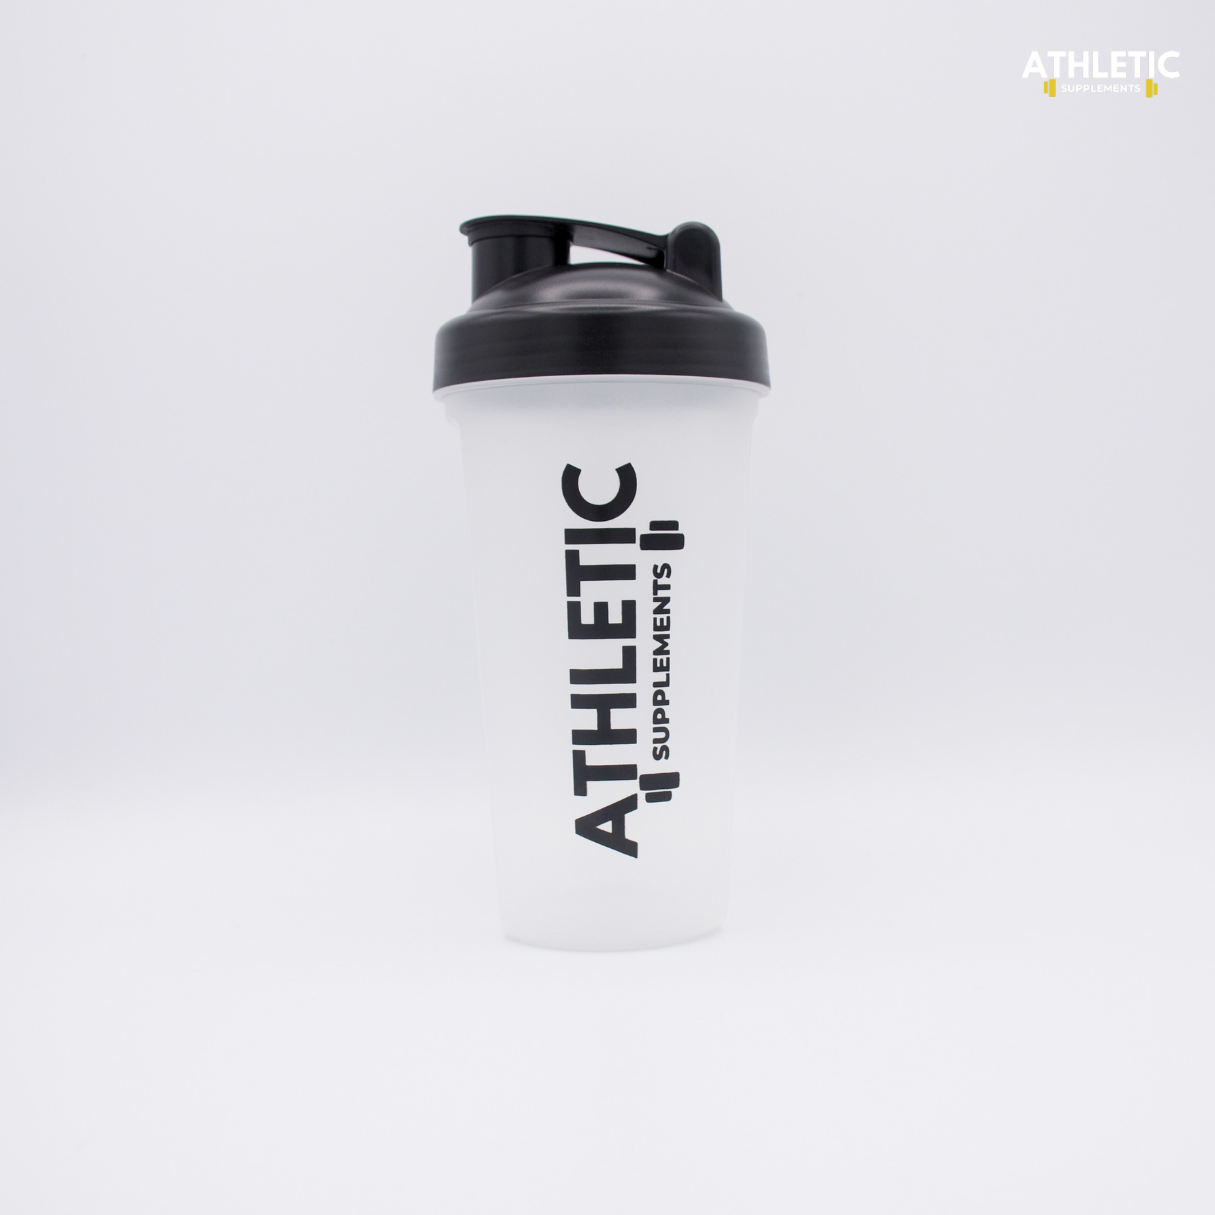 Pro Shaker Athletic Supplements